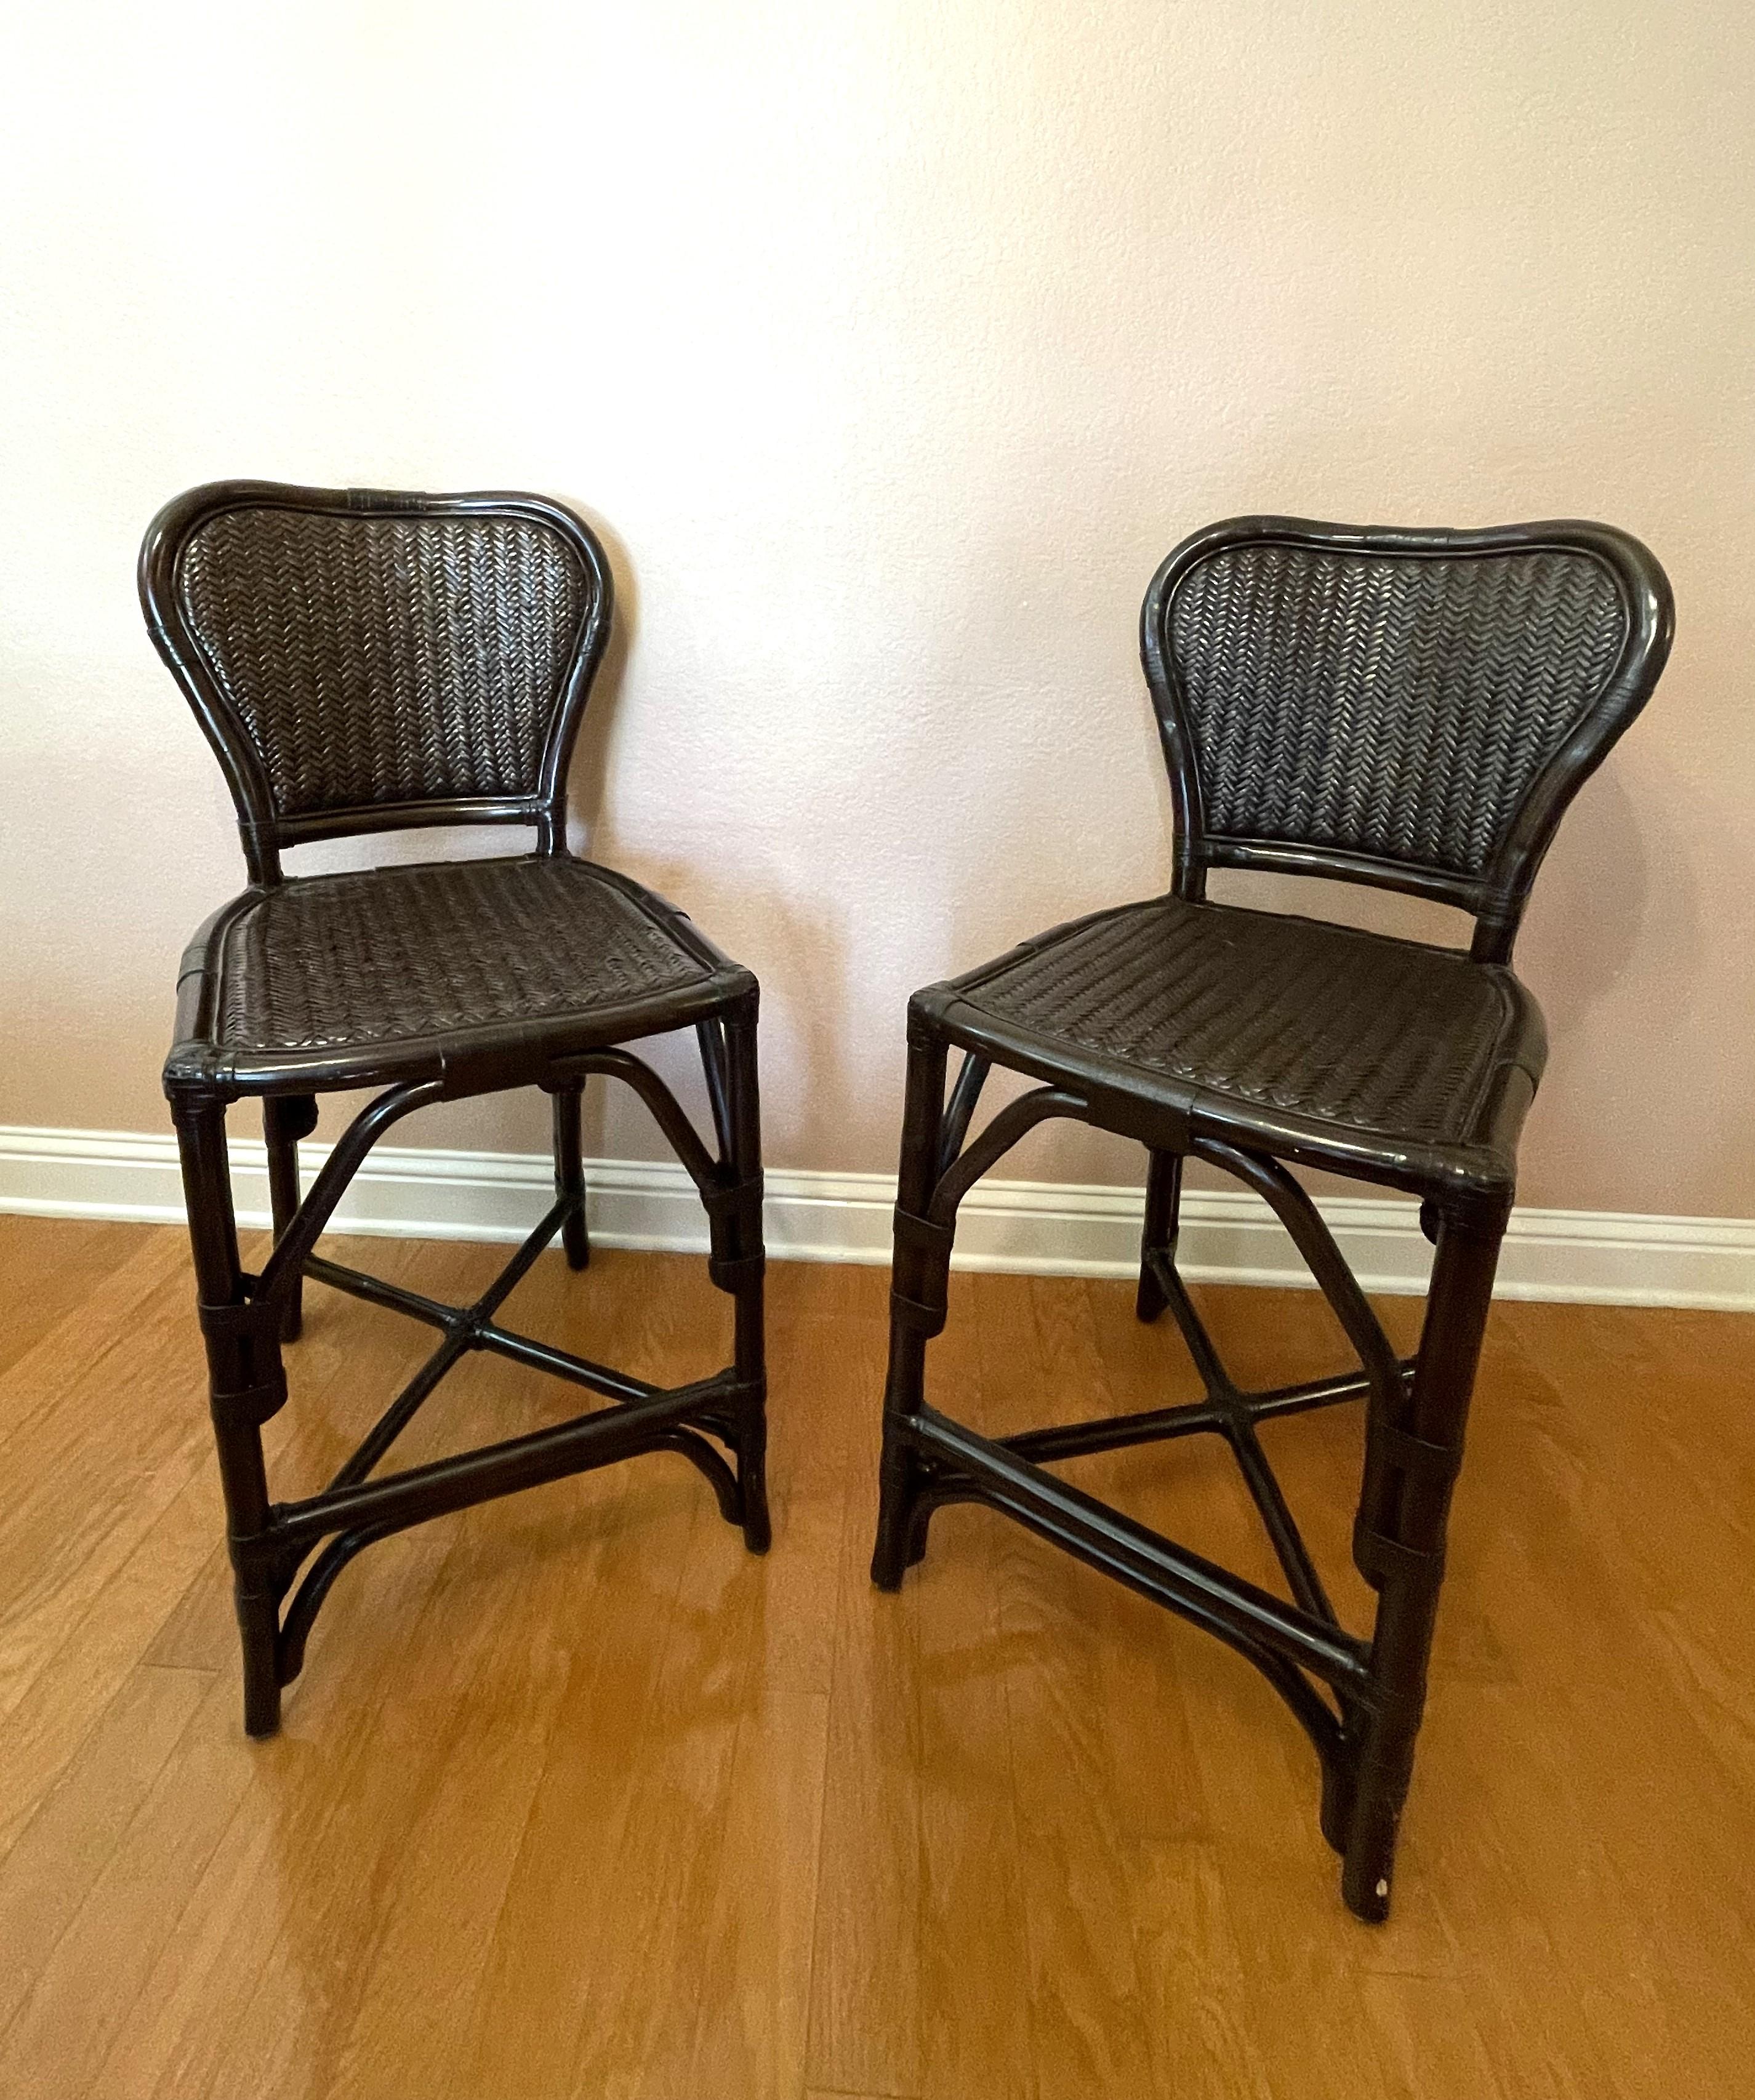 Black Rattan Bar Chairs For Sale 2